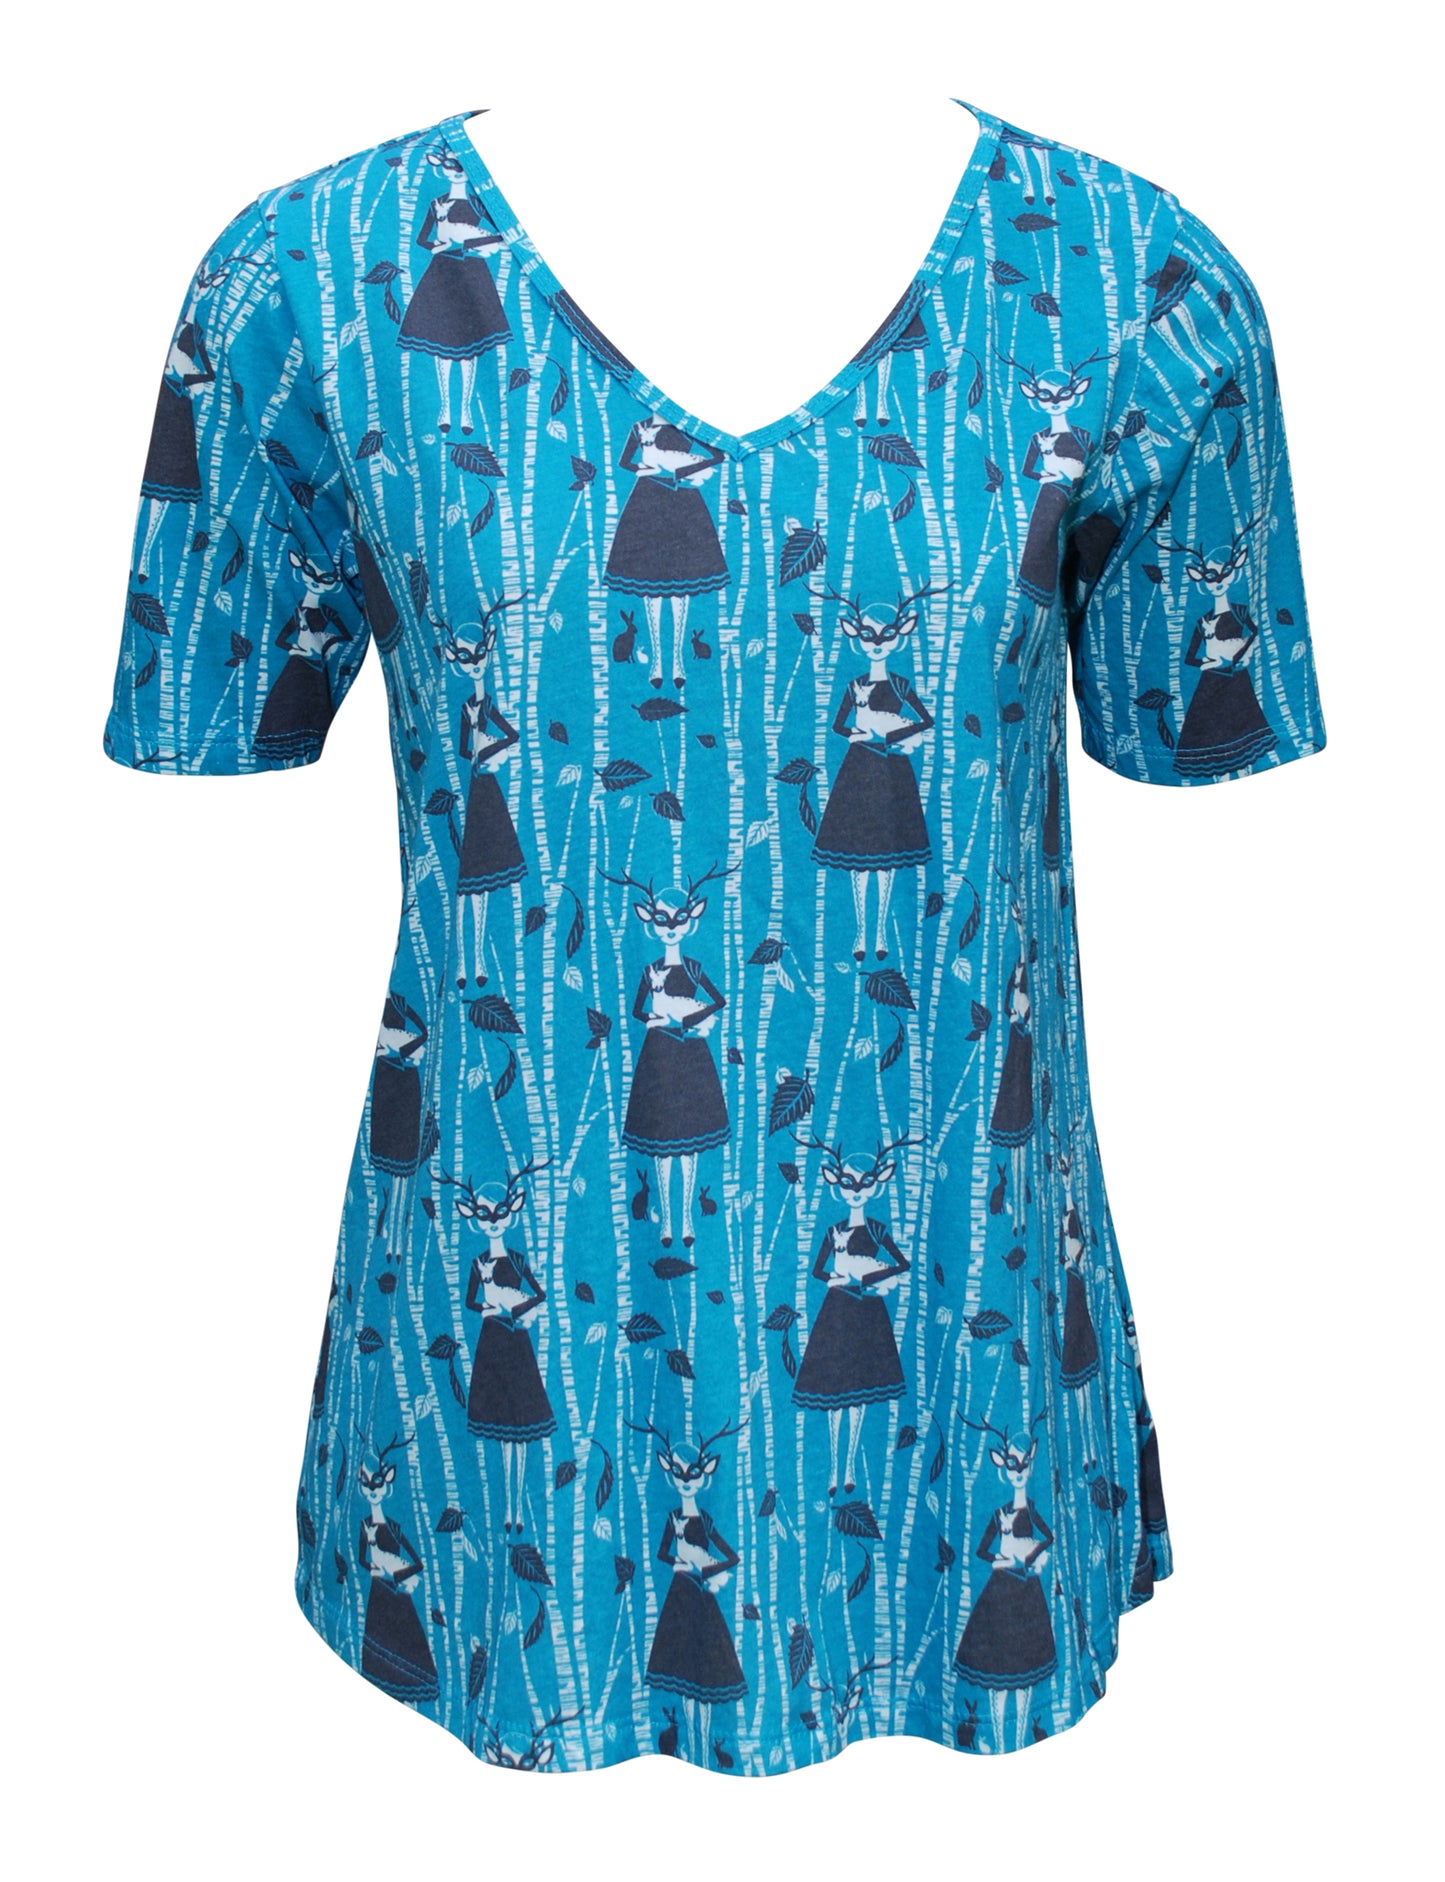 Blue grey v-neck featuring print of masked girl with deer, birch trees and leaves